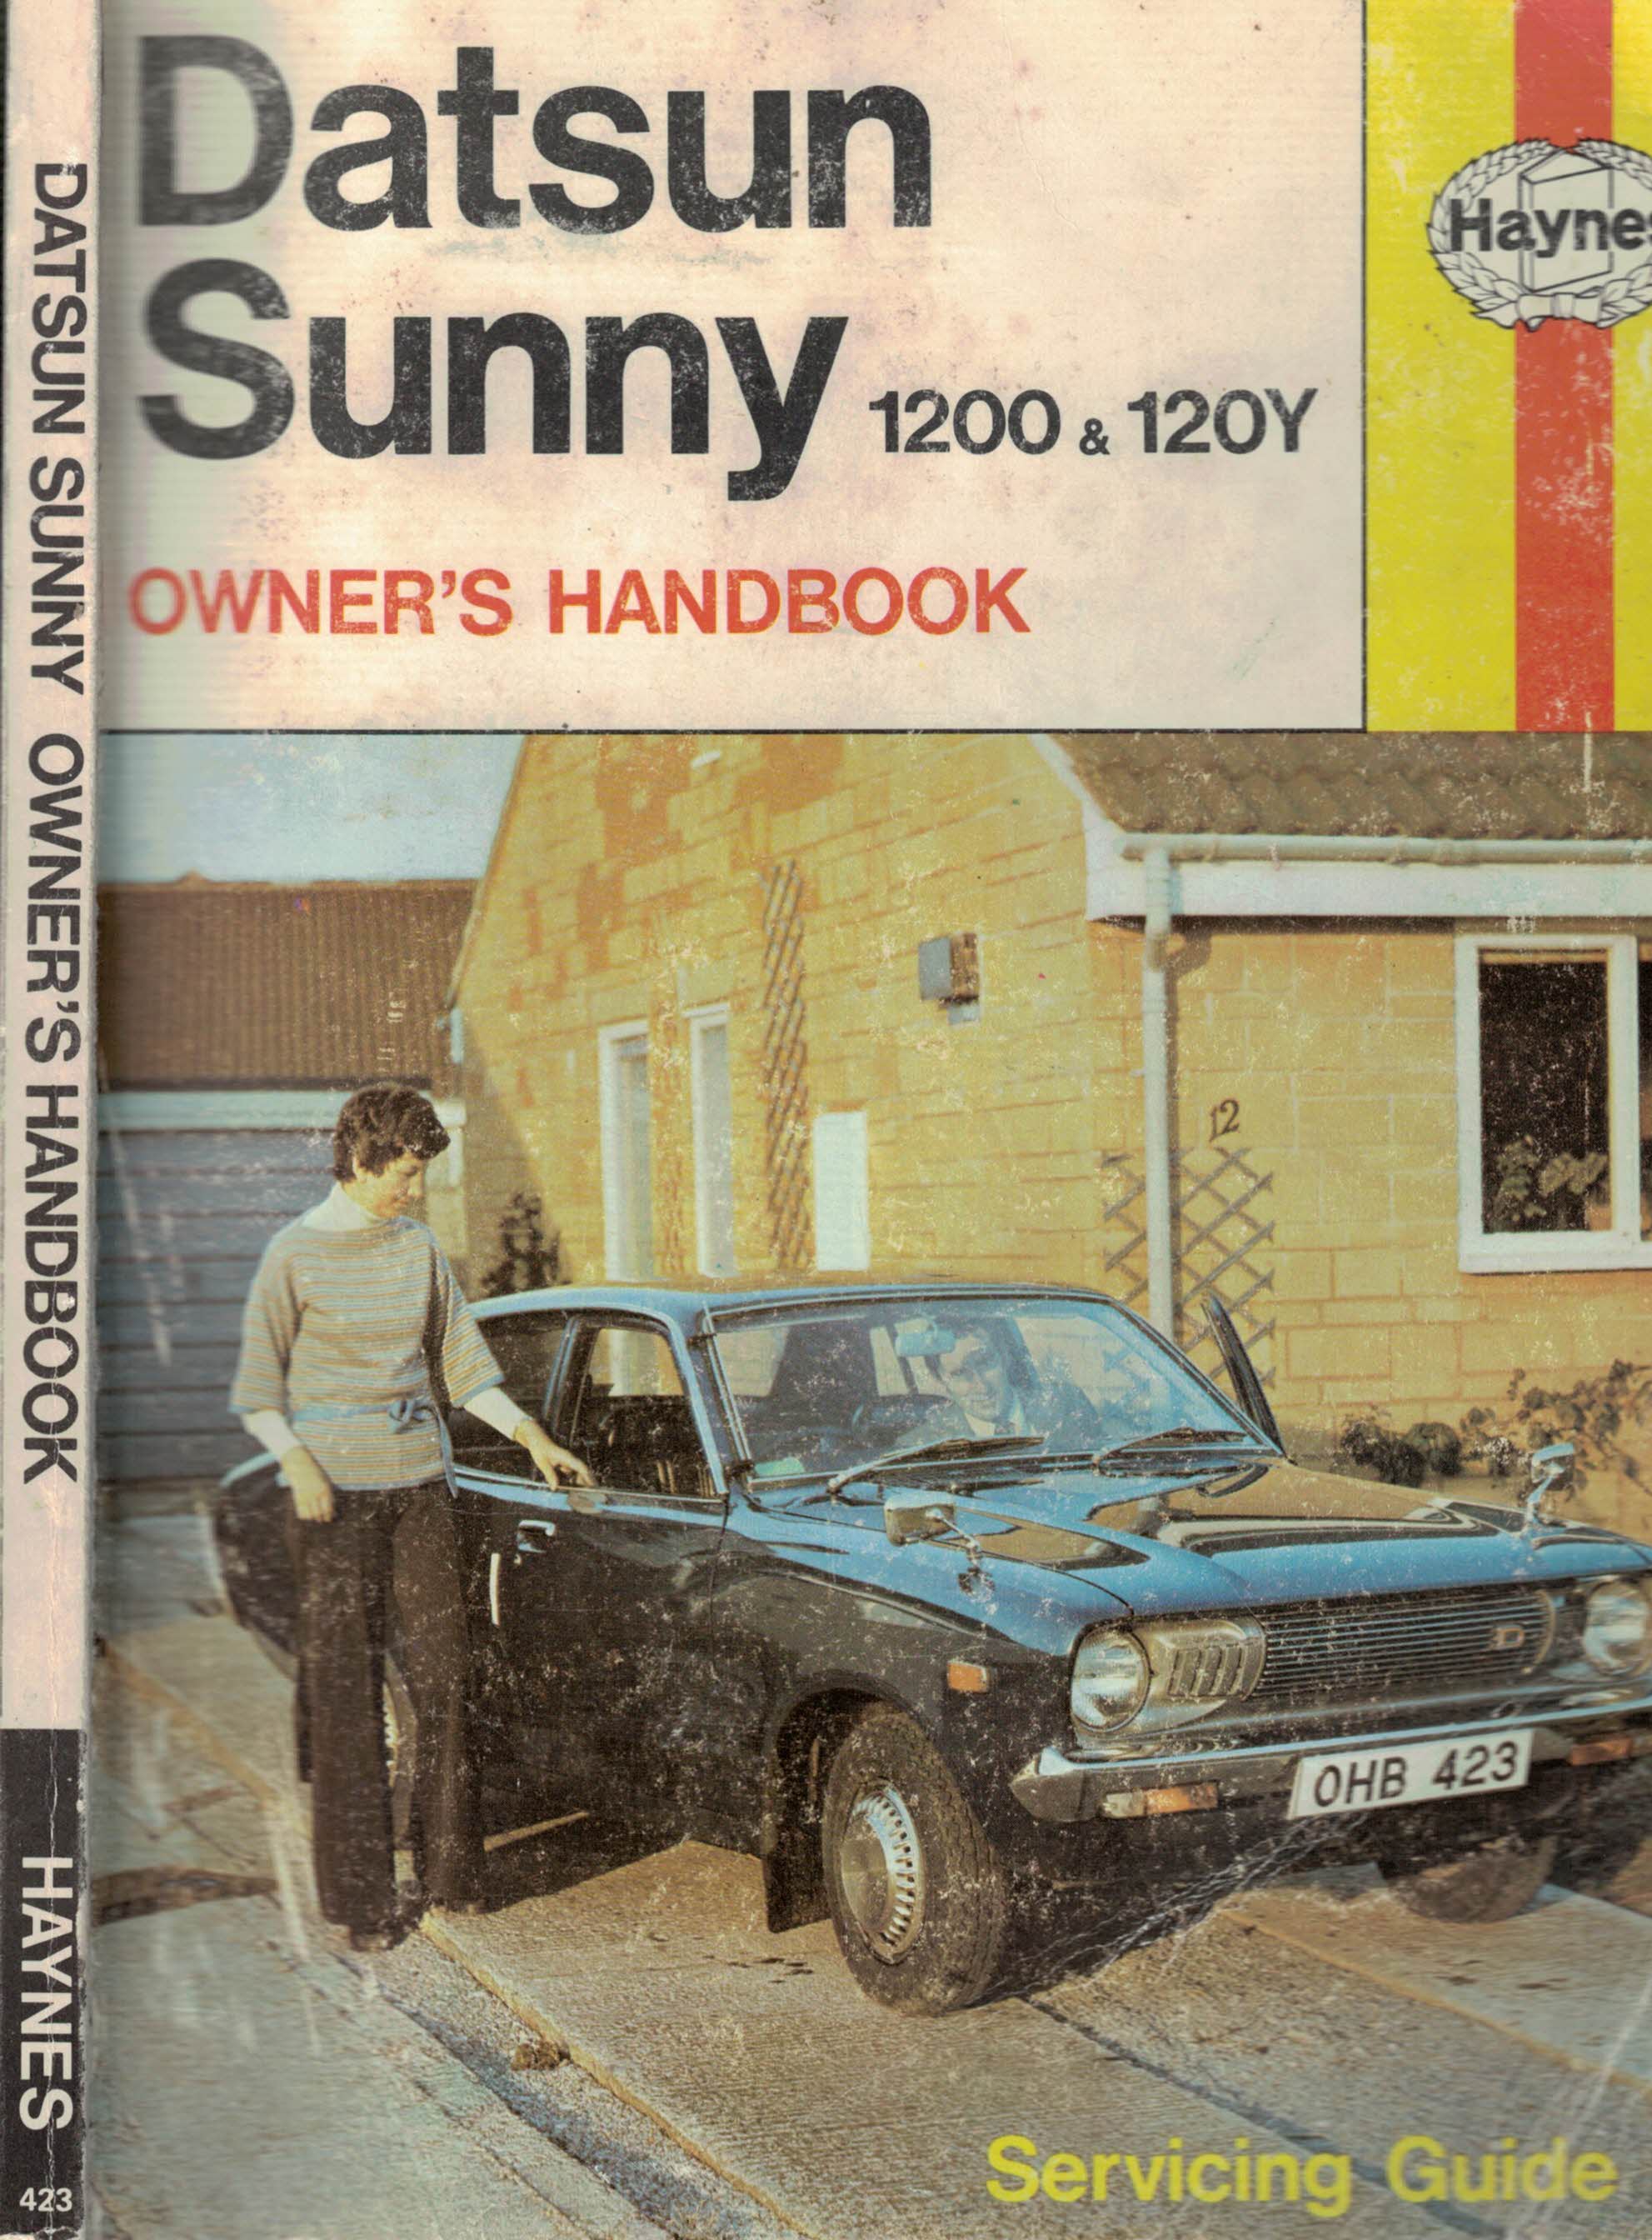 Datsun Sunny 1200 & 120Y. All UK Saloon, Coupe and Estate Models: Datsun 1200, 1970 - 73, Datsun 120Y, 1973 - 78. Owner's Handbook/Servicing Guide.